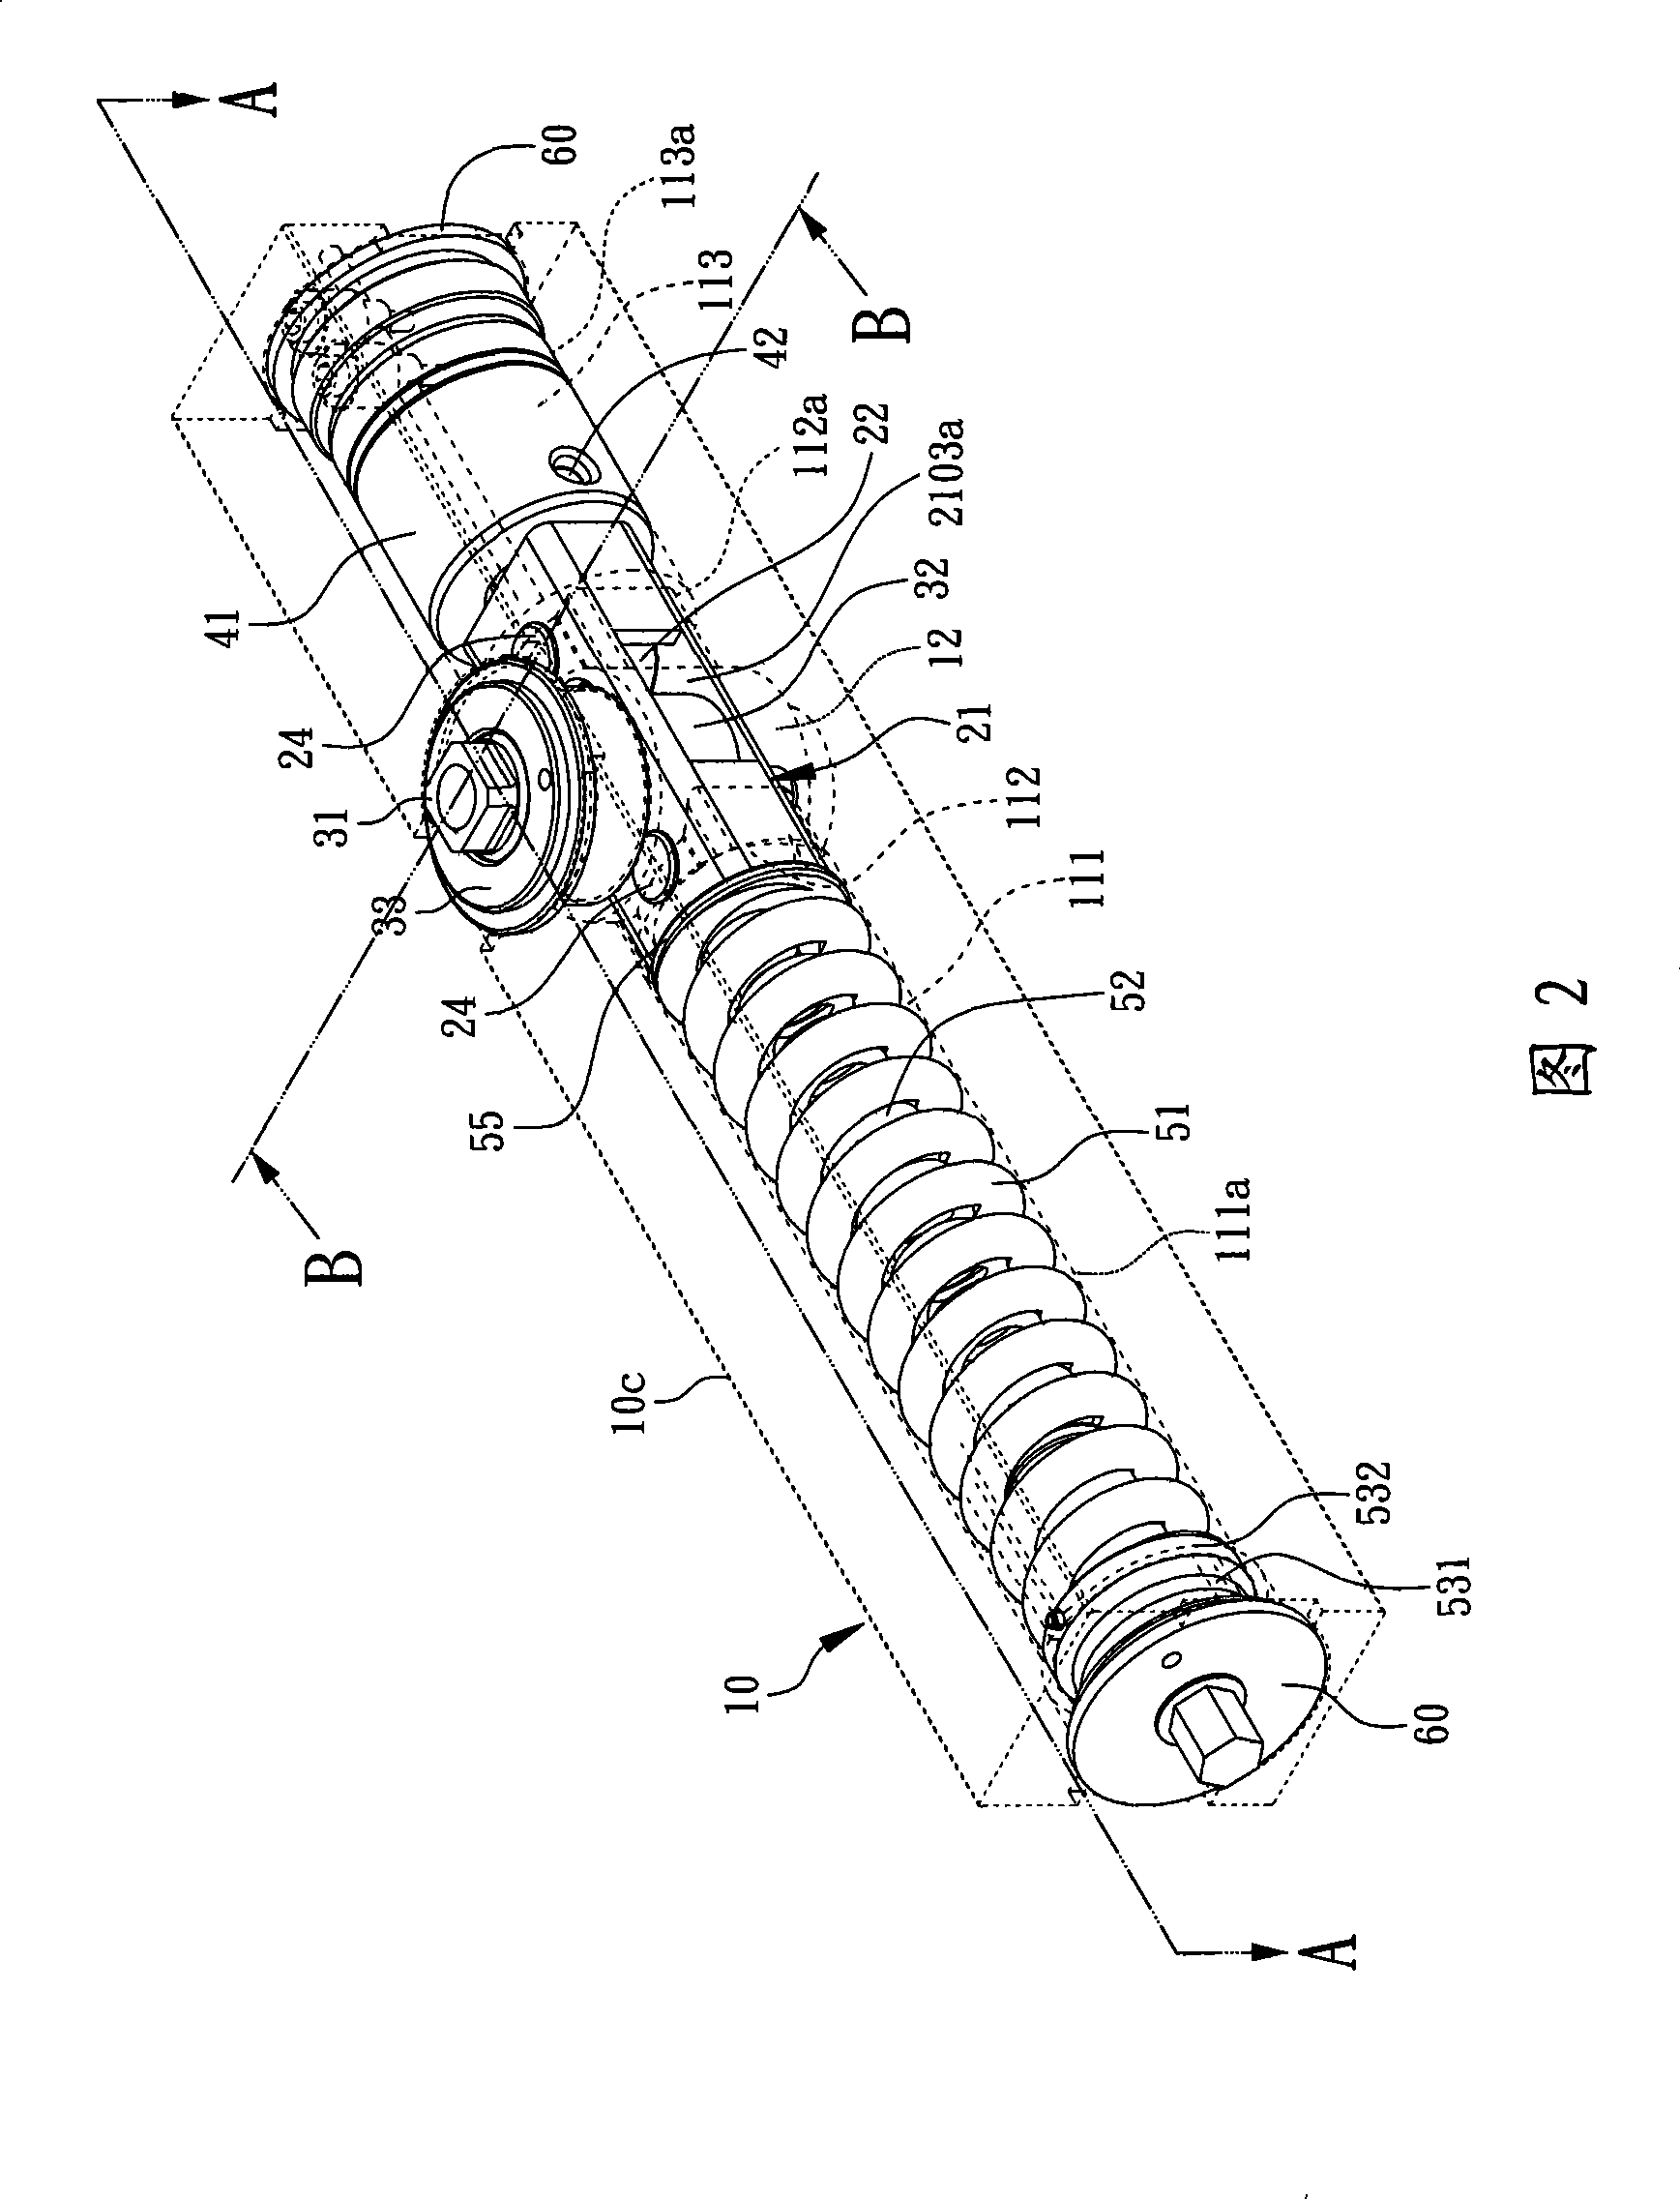 Device for automatically closing door